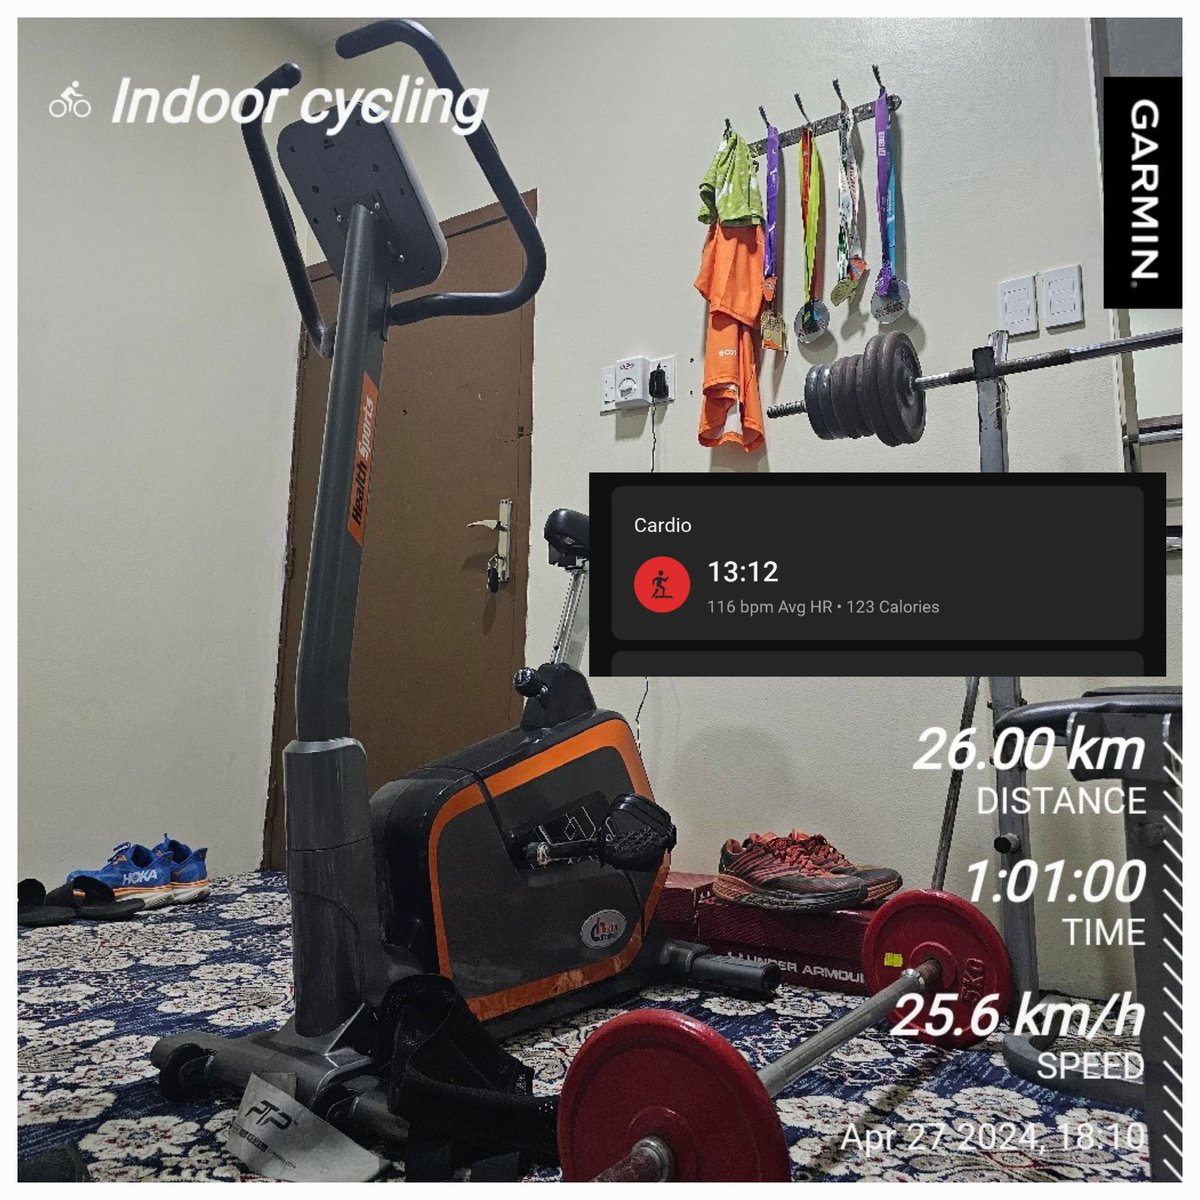 It's all about realising how small you are,unwise,and how far you have yet to go.
#indoorCycling #beatyesterday